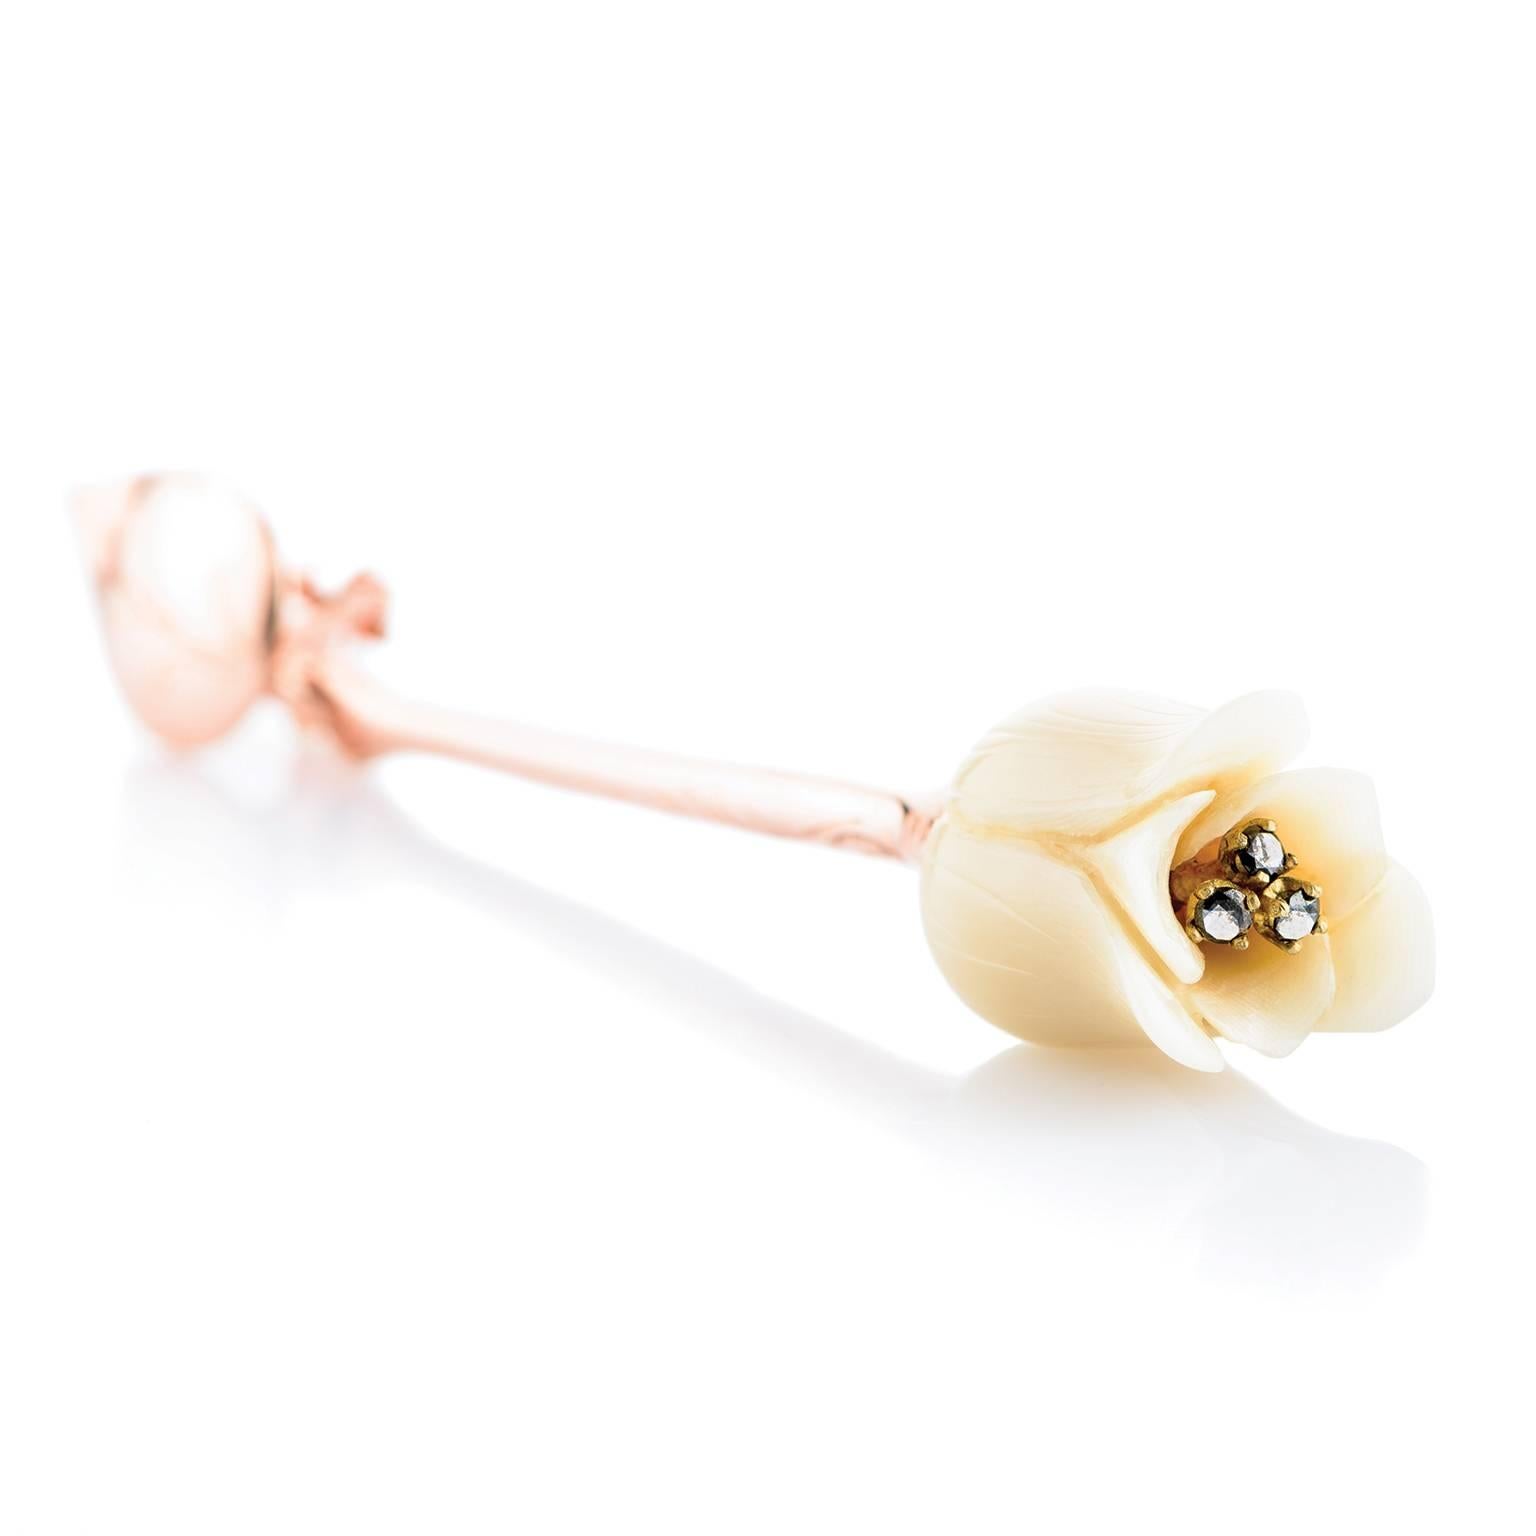 La Tulipe …  Our homage to Holland’s iconic flower. These graceful and feminine earrings reflect the fleeting beauty of the pure white tulips. Gold and diamonds and Nuvory® combine to capture Nature’s brief but impressive explosion of beauty.

A